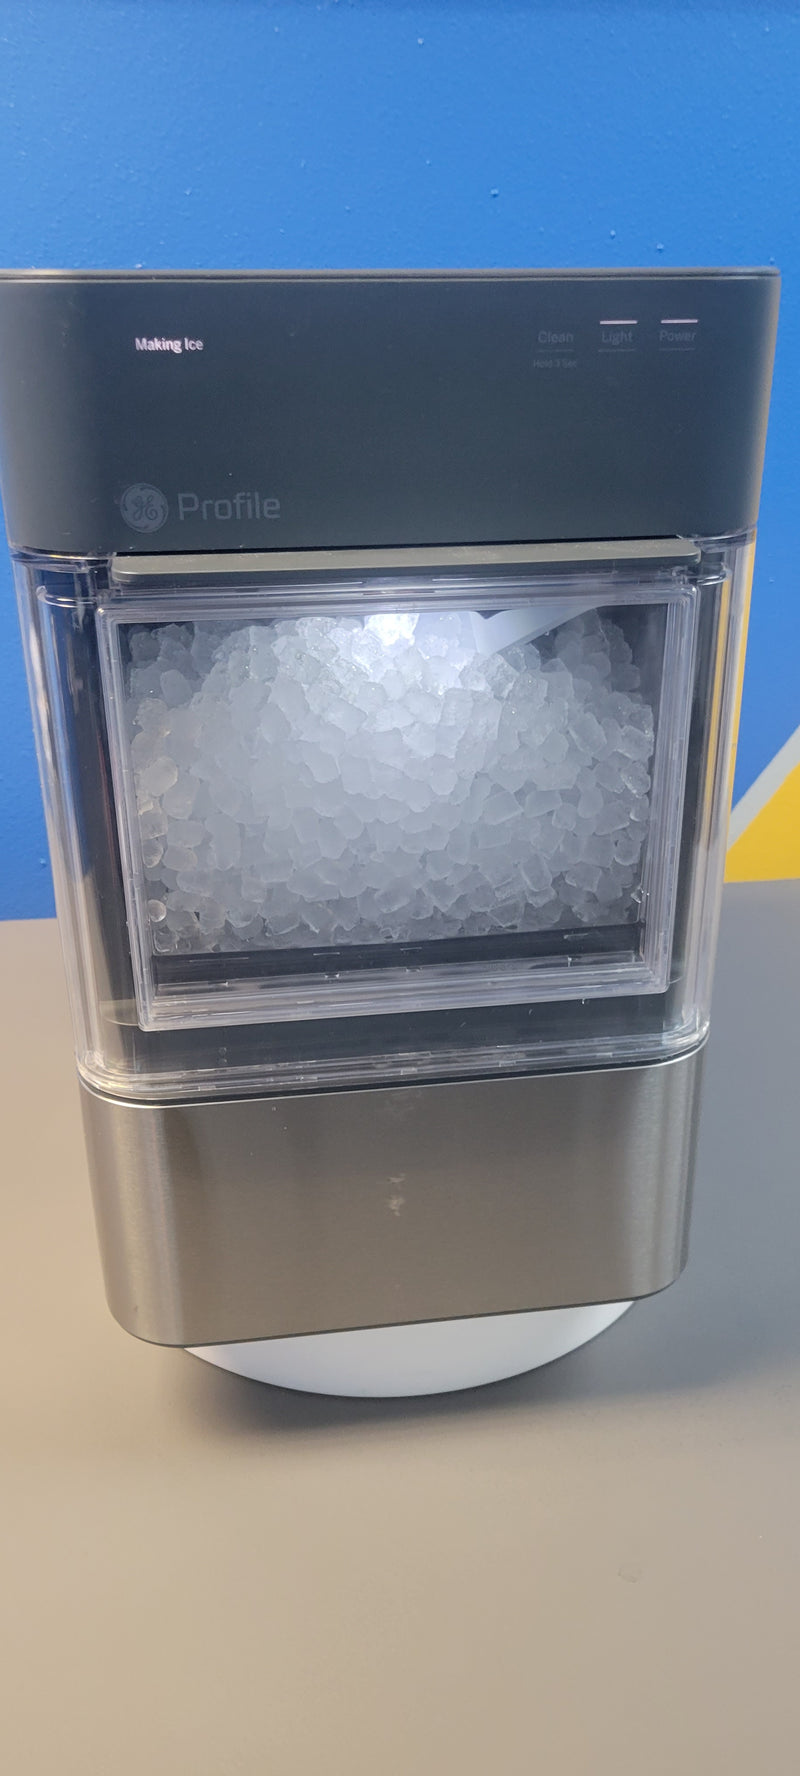 GE Profile - Opal 2.0 38 lb. Portable Ice maker with Nugget Ice Production and Built-In WiFi - Stainless Steel (UG Cosmetic Dents)